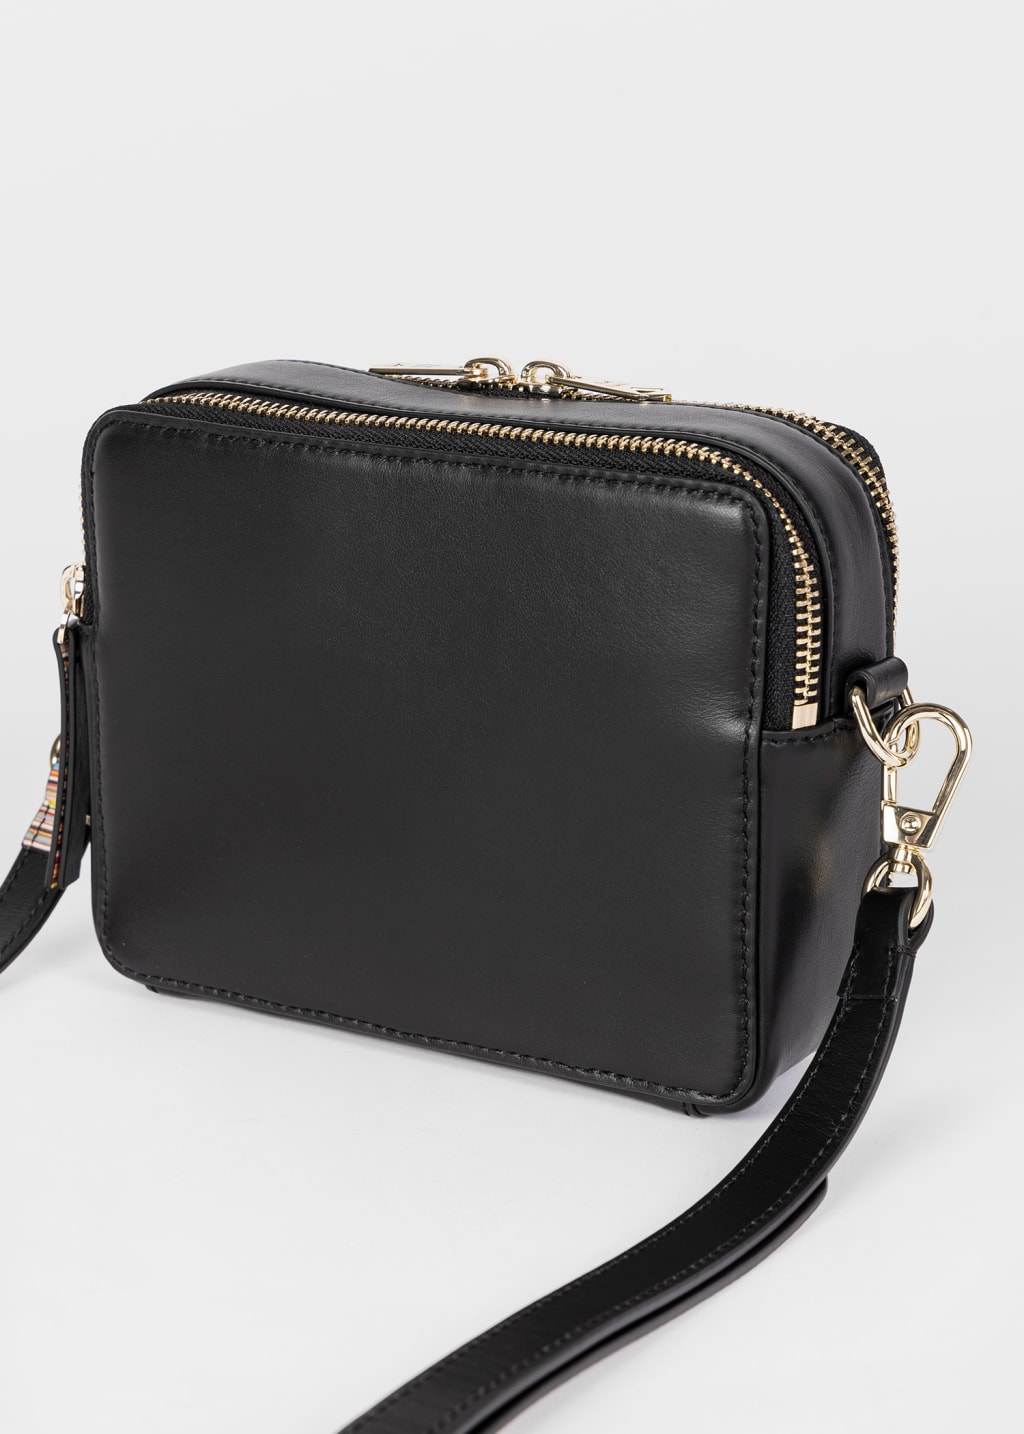 Product View - Women's Black Leather 'Signature Stripe' Camera Bag by Paul Smith